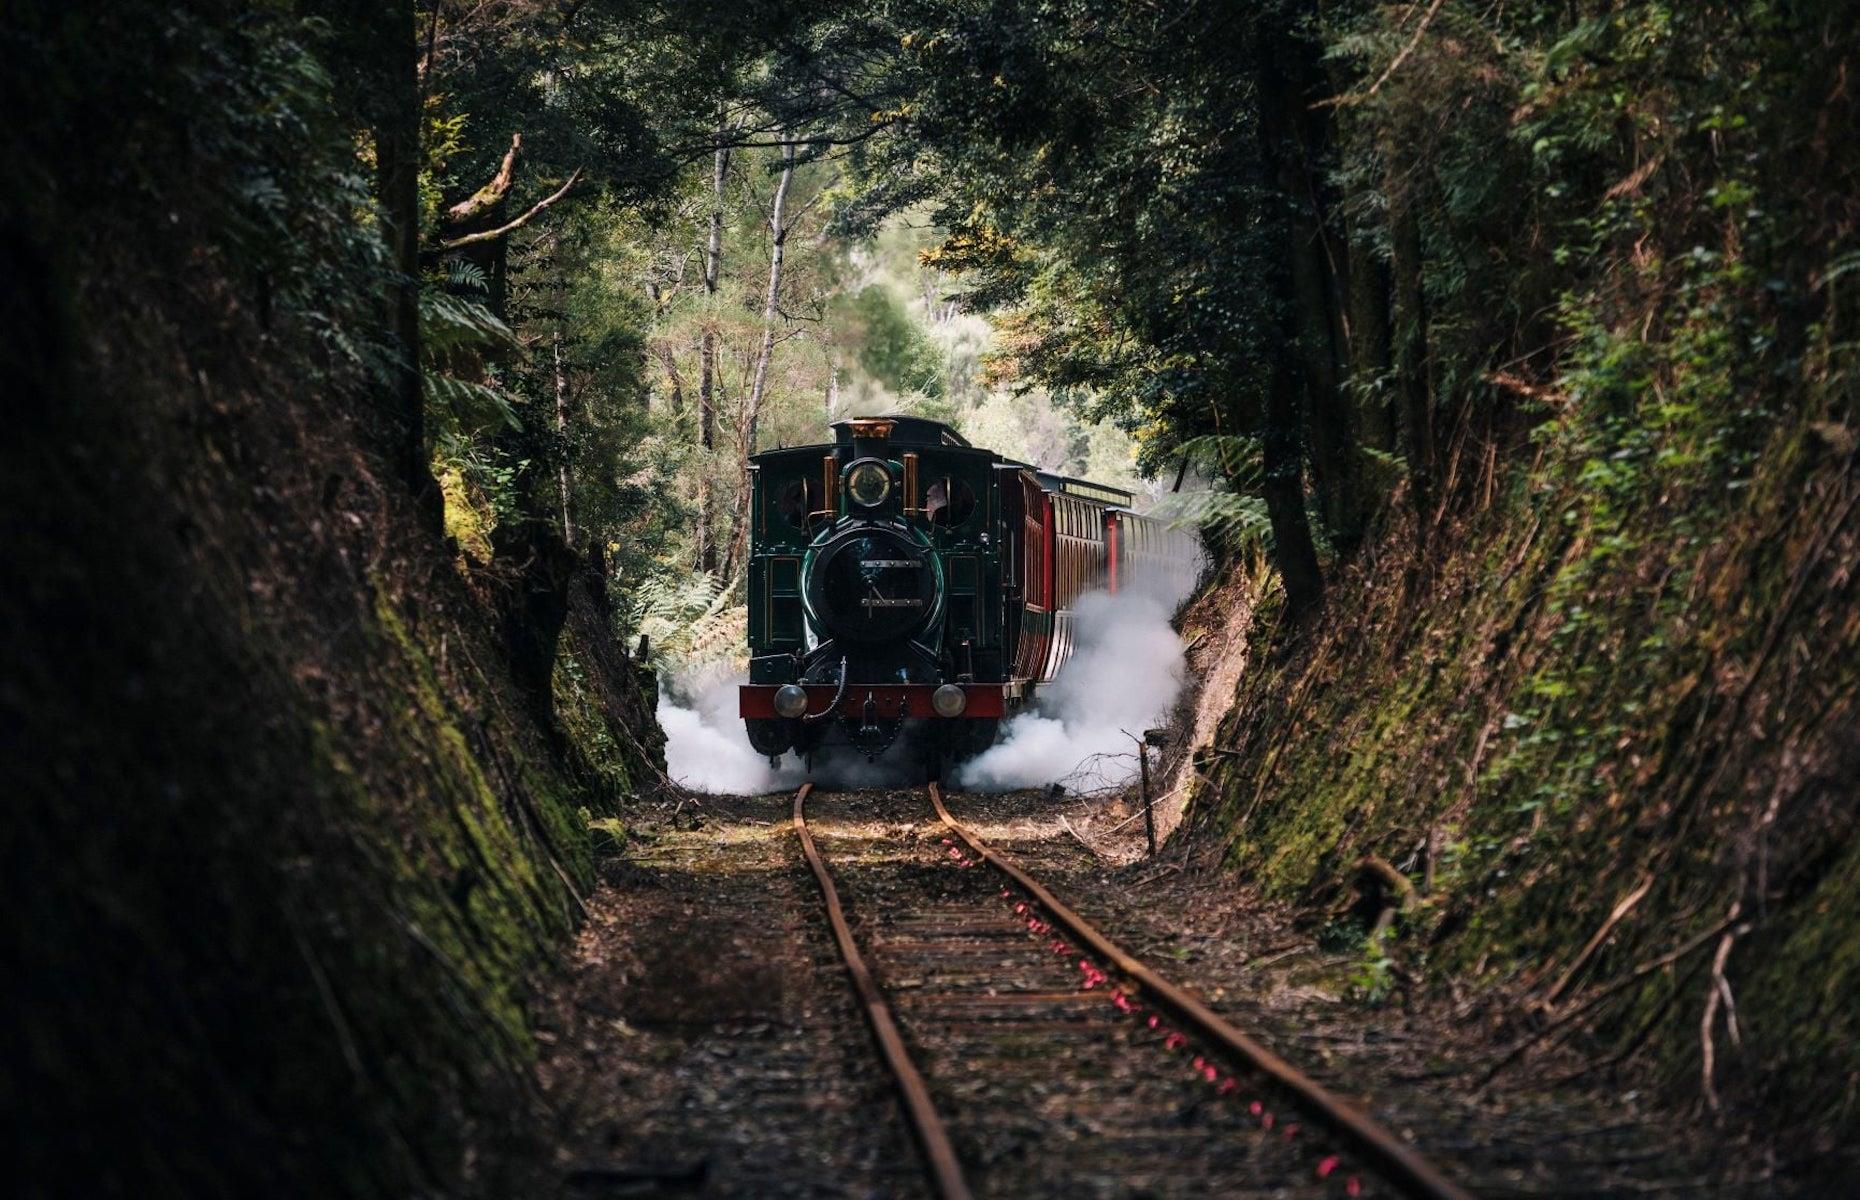 <p>From transporting copper to top Tassie attraction, <a href="https://www.wcwr.com.au">The West Coast Wilderness Railway</a> runs 22 miles (35km) between the old mining town of Queenstown and the port of Strahan on the island’s wild west coast. It’s a short but spectacular trip aboard restored heritage trains, running through tracts of dense ancient rainforest and up some seriously steep slopes. At present it’s not possible to travel the length of the railway in both directions, but this will resume in 2023.</p>